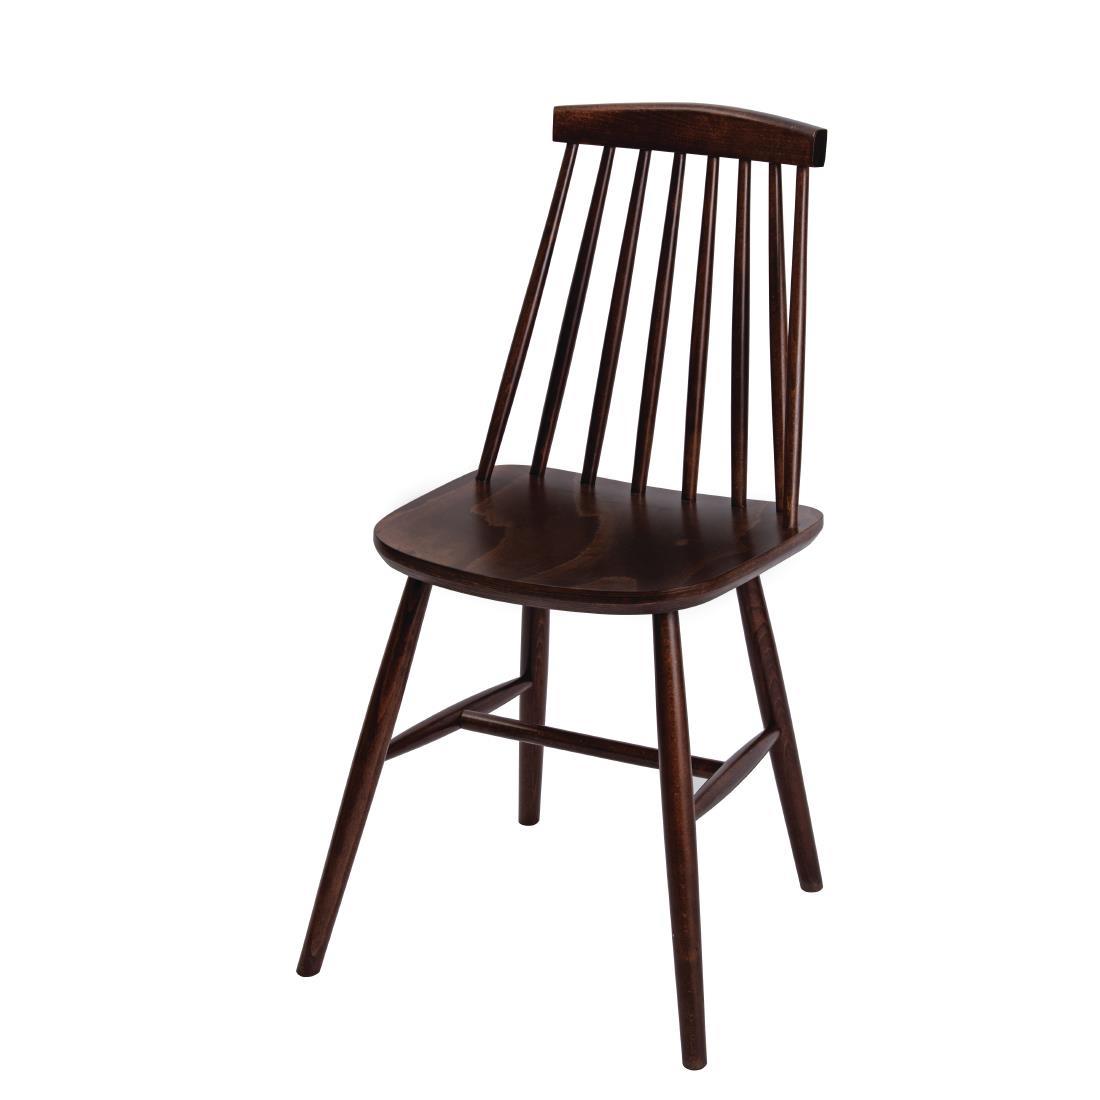 Fameg Farmhouse Angled Side Chairs Walnut Effect (Pack of 2) - DC352  - 2